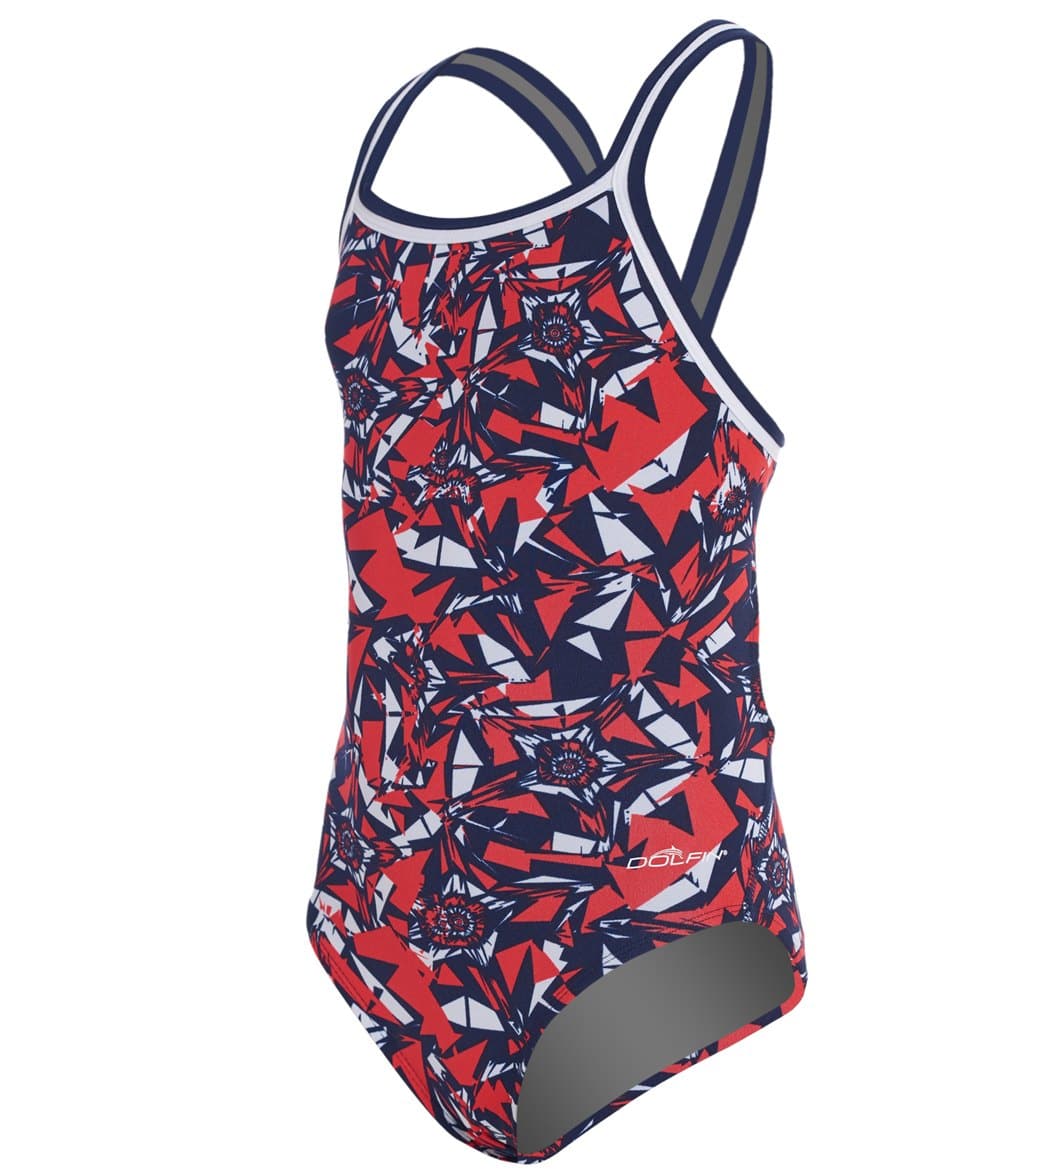 Dolfin Girls' Reliance Ion Dbx V-Back One Piece Swimsuit - Red/White/Blue 24 Polyester - Swimoutlet.com